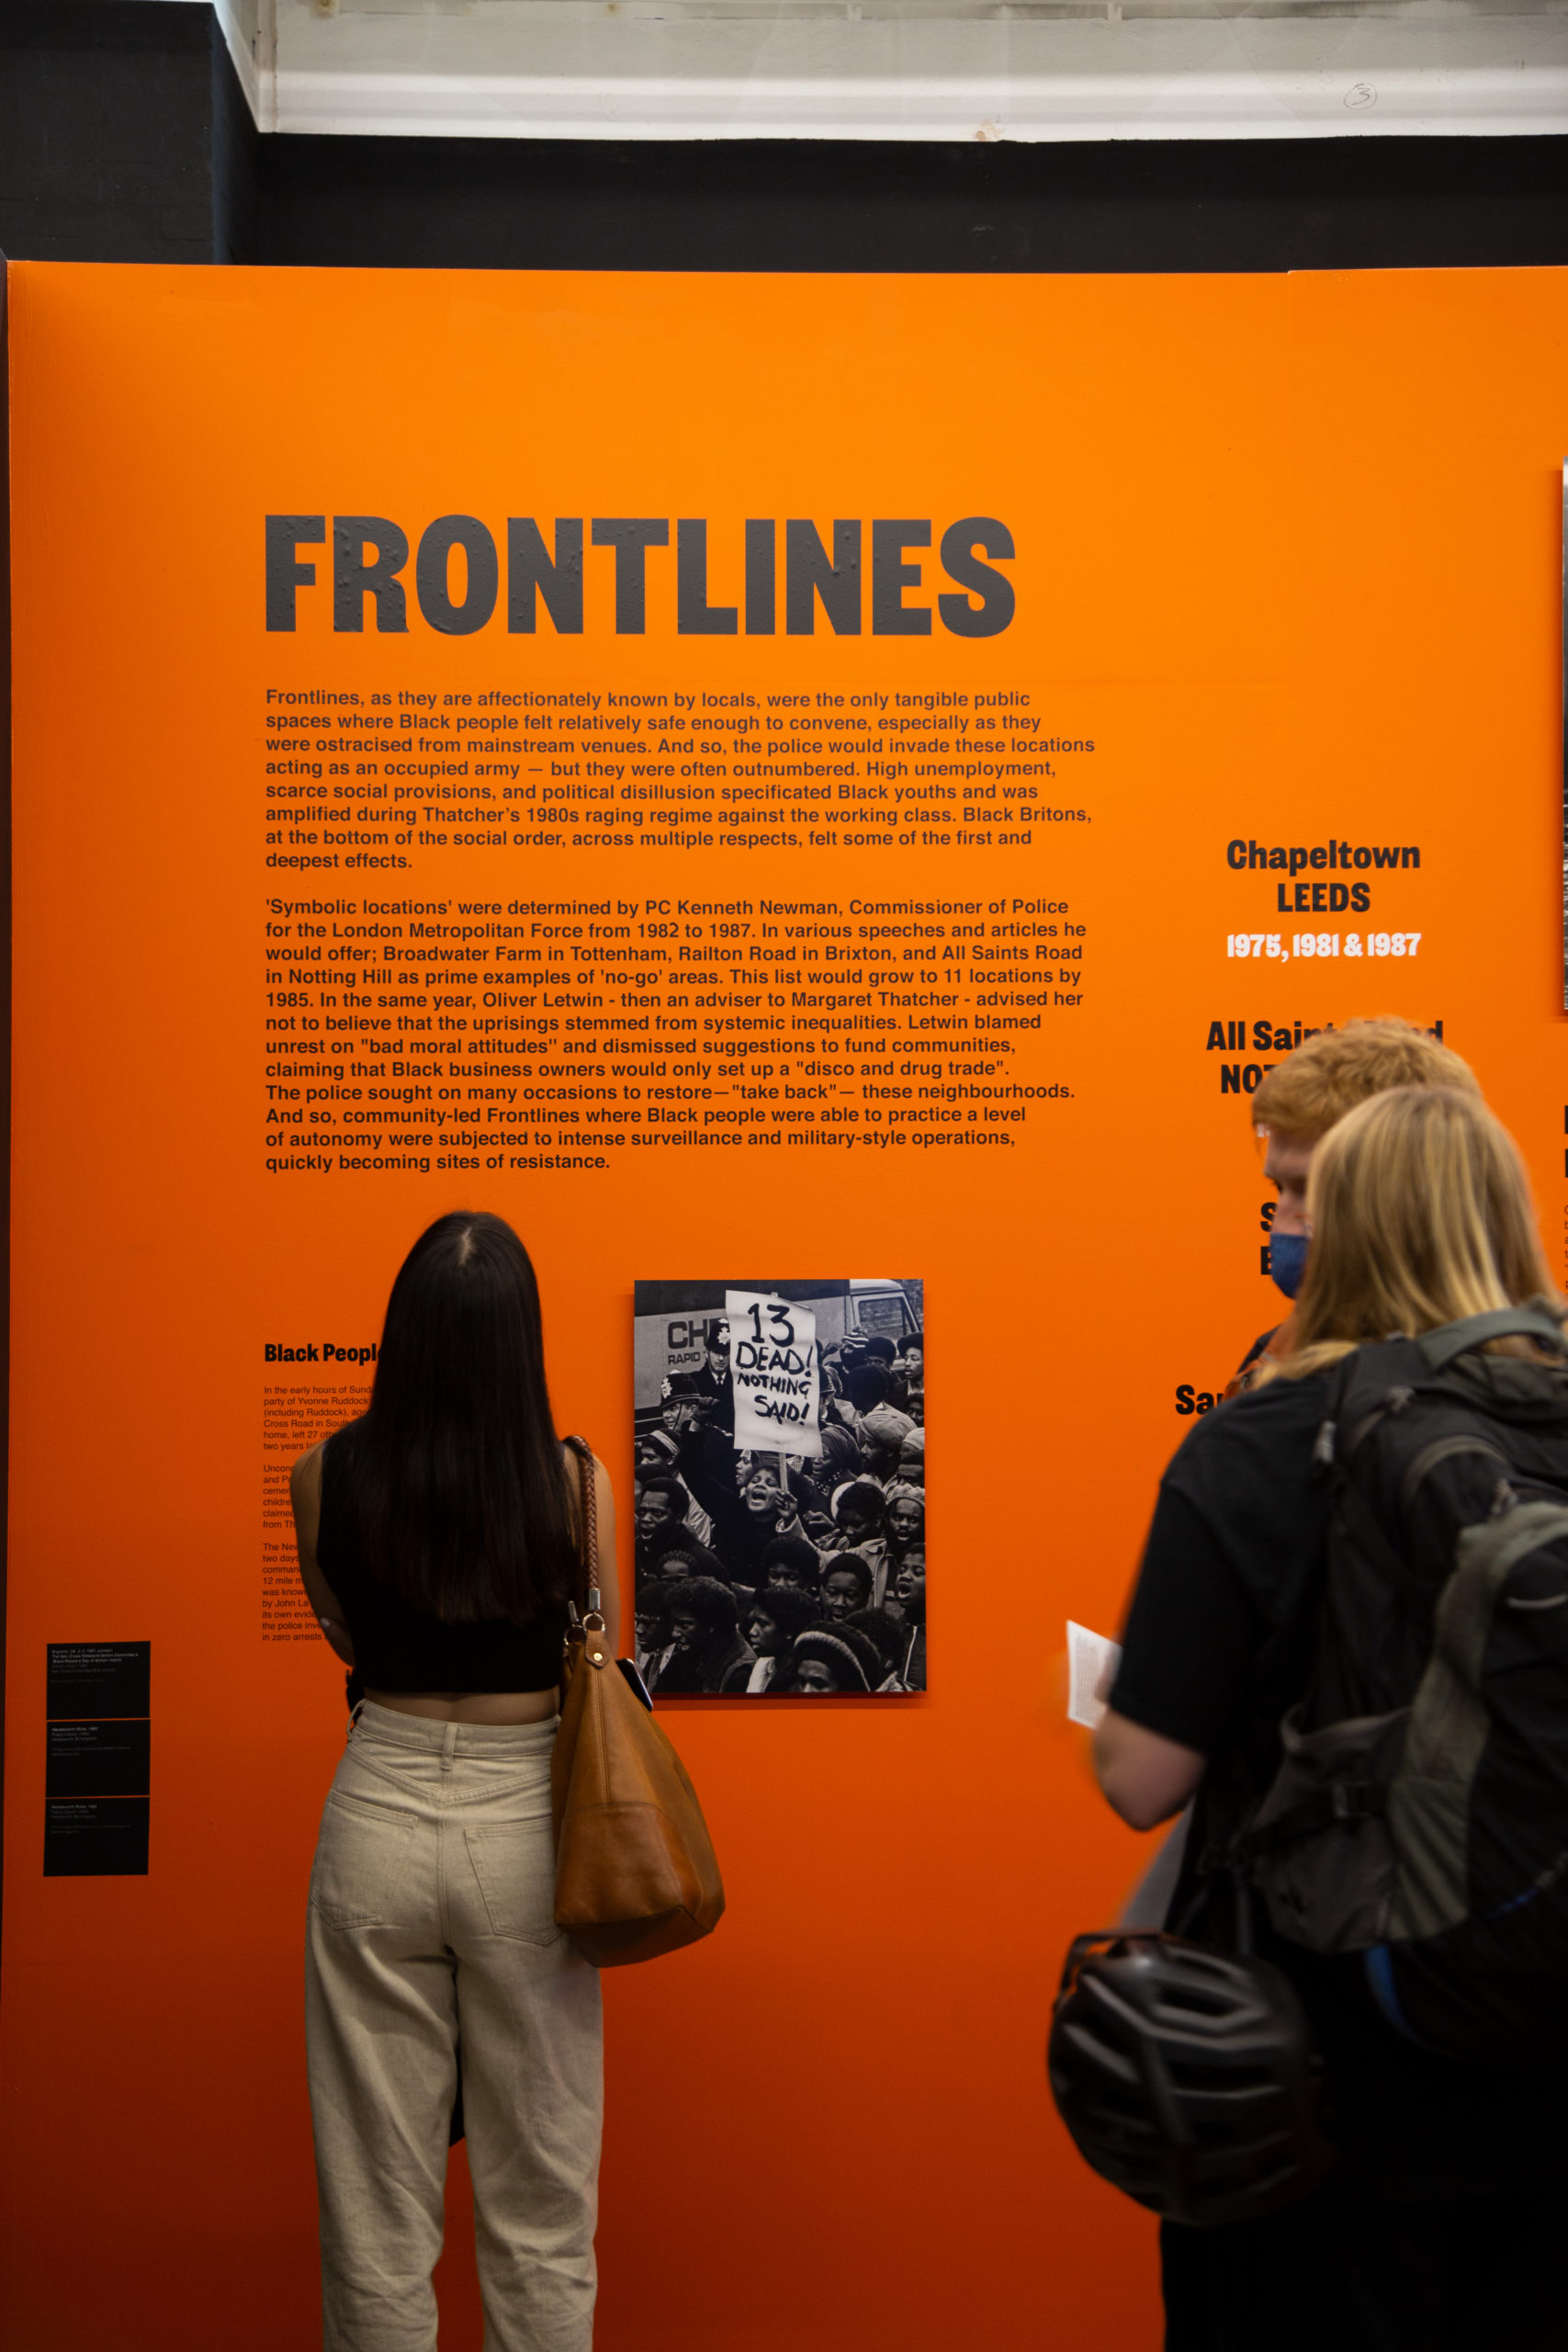 Several people standing in front of an orange wall with a photo of protestors and text that describes the significance of 